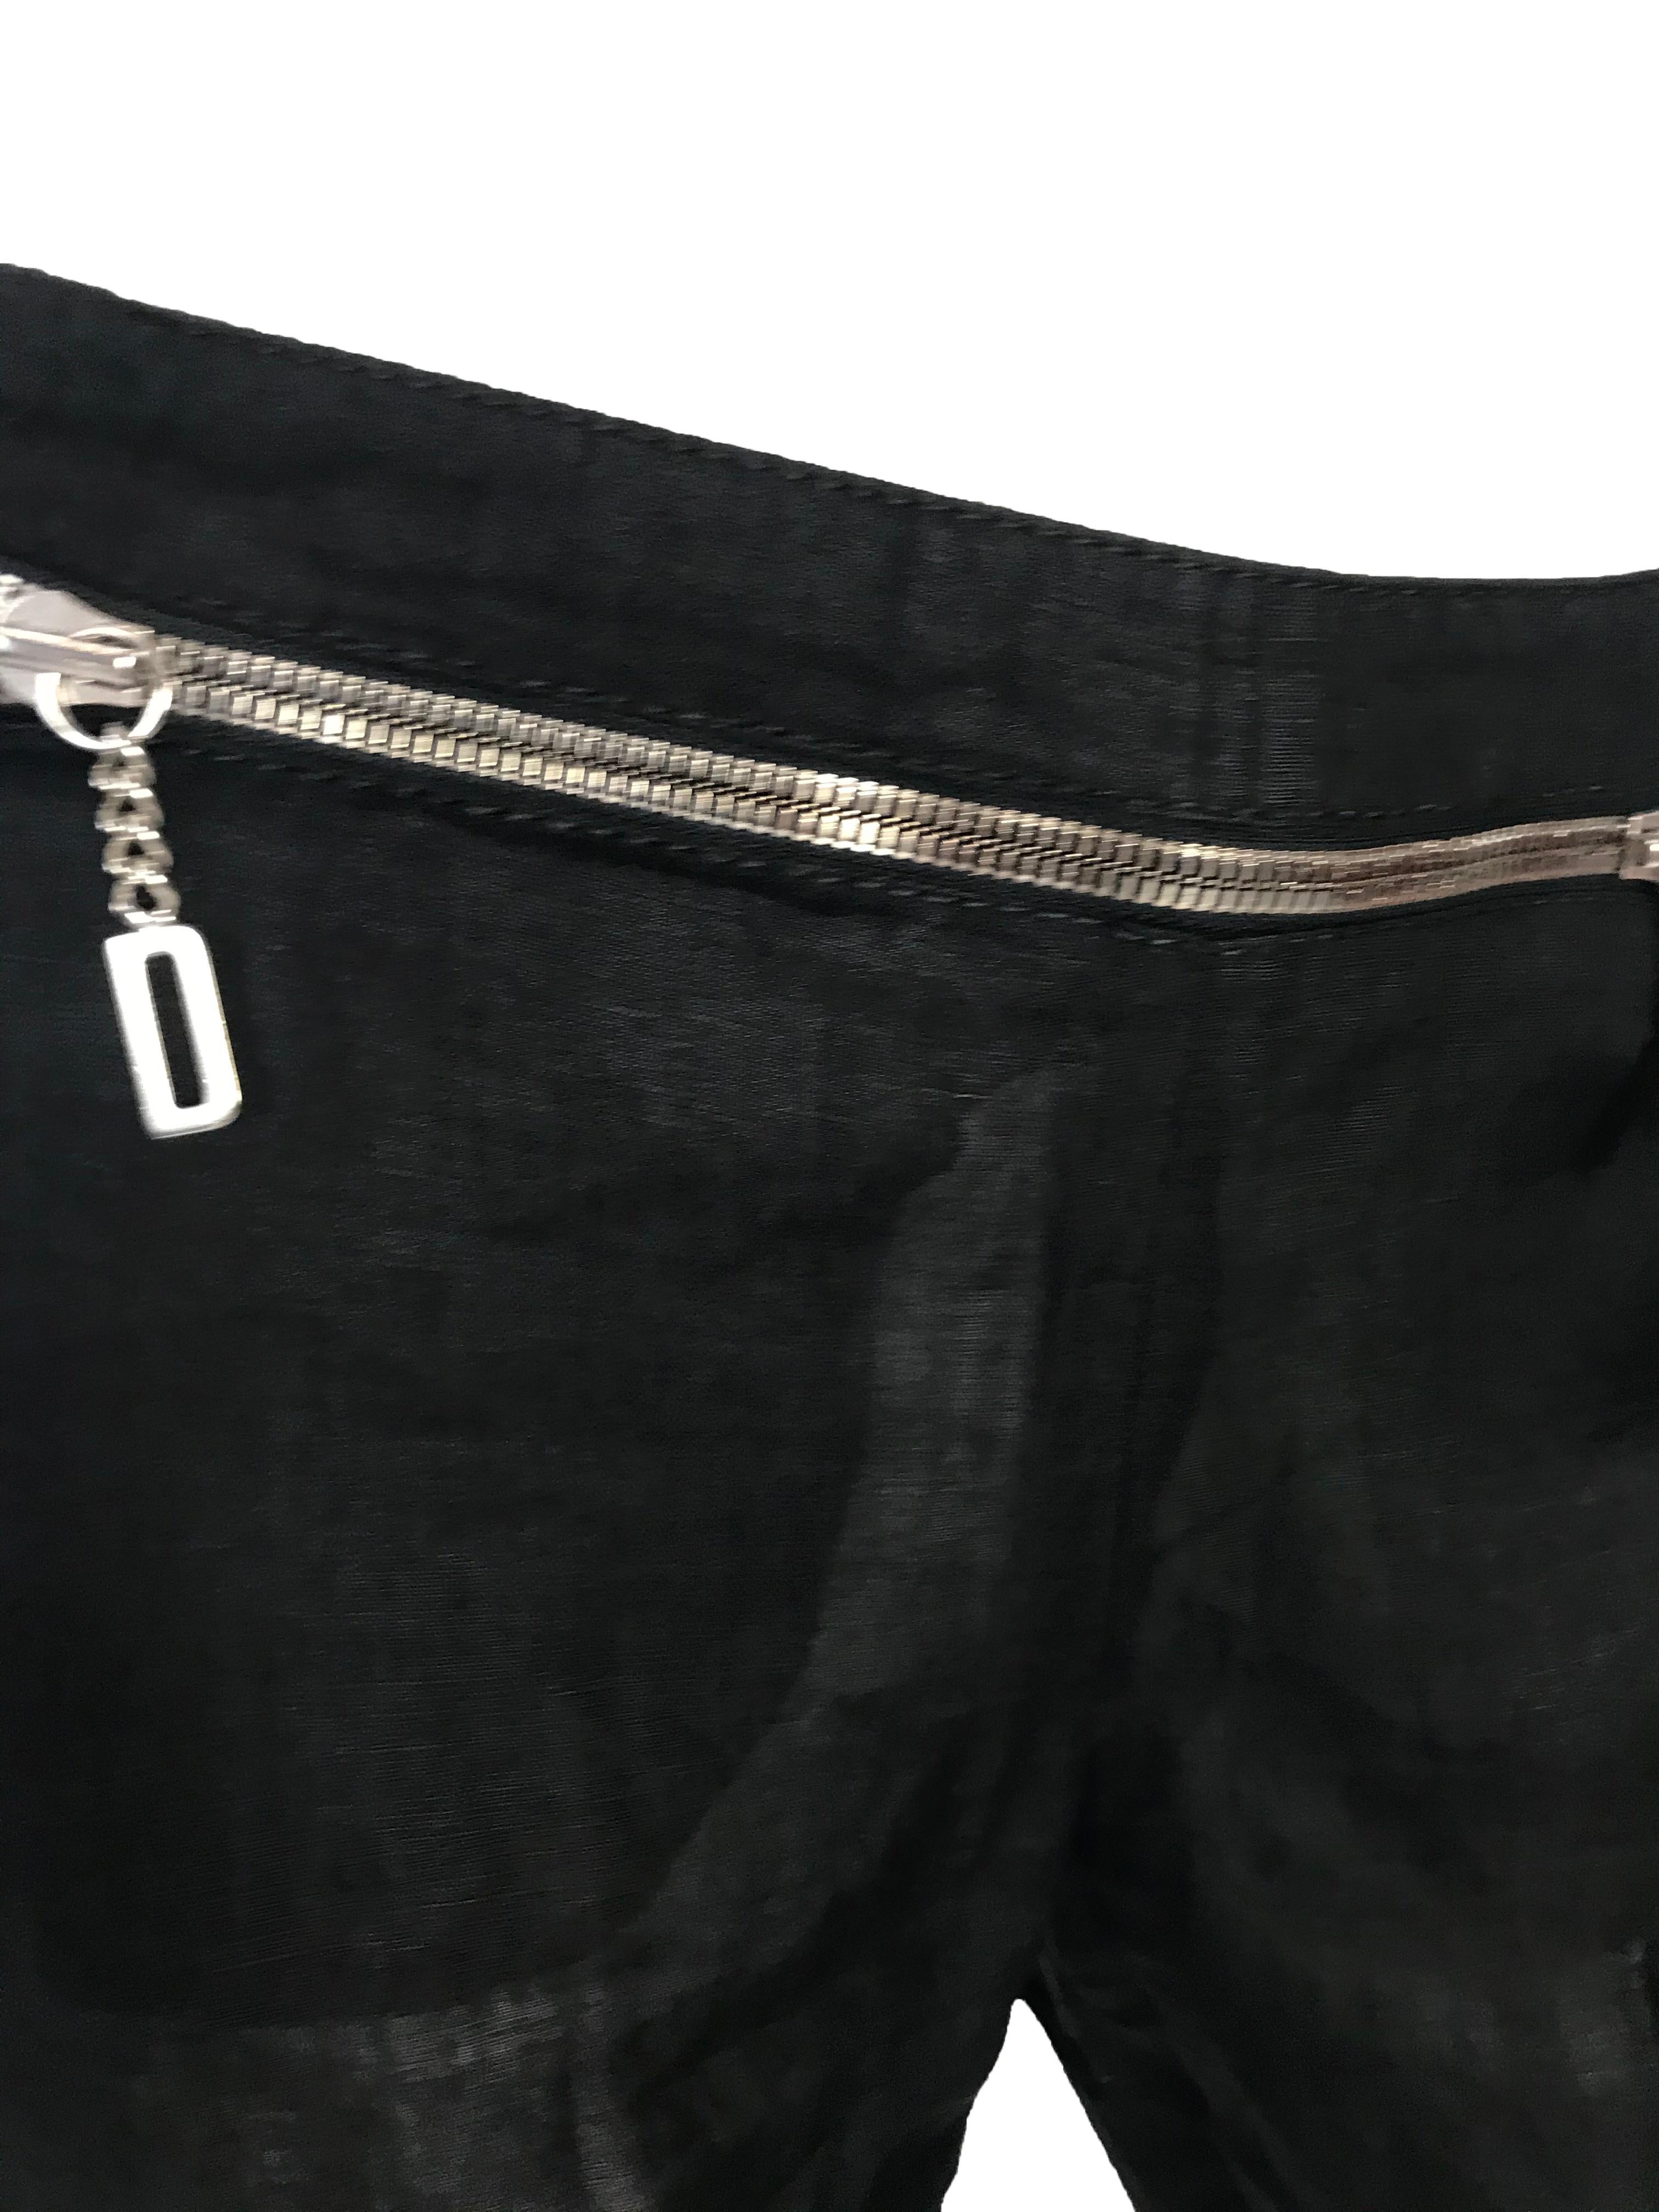 Dirk Bikkembergs black linen zipper pants
Made in Italy
Condition: Excellent
Size 42